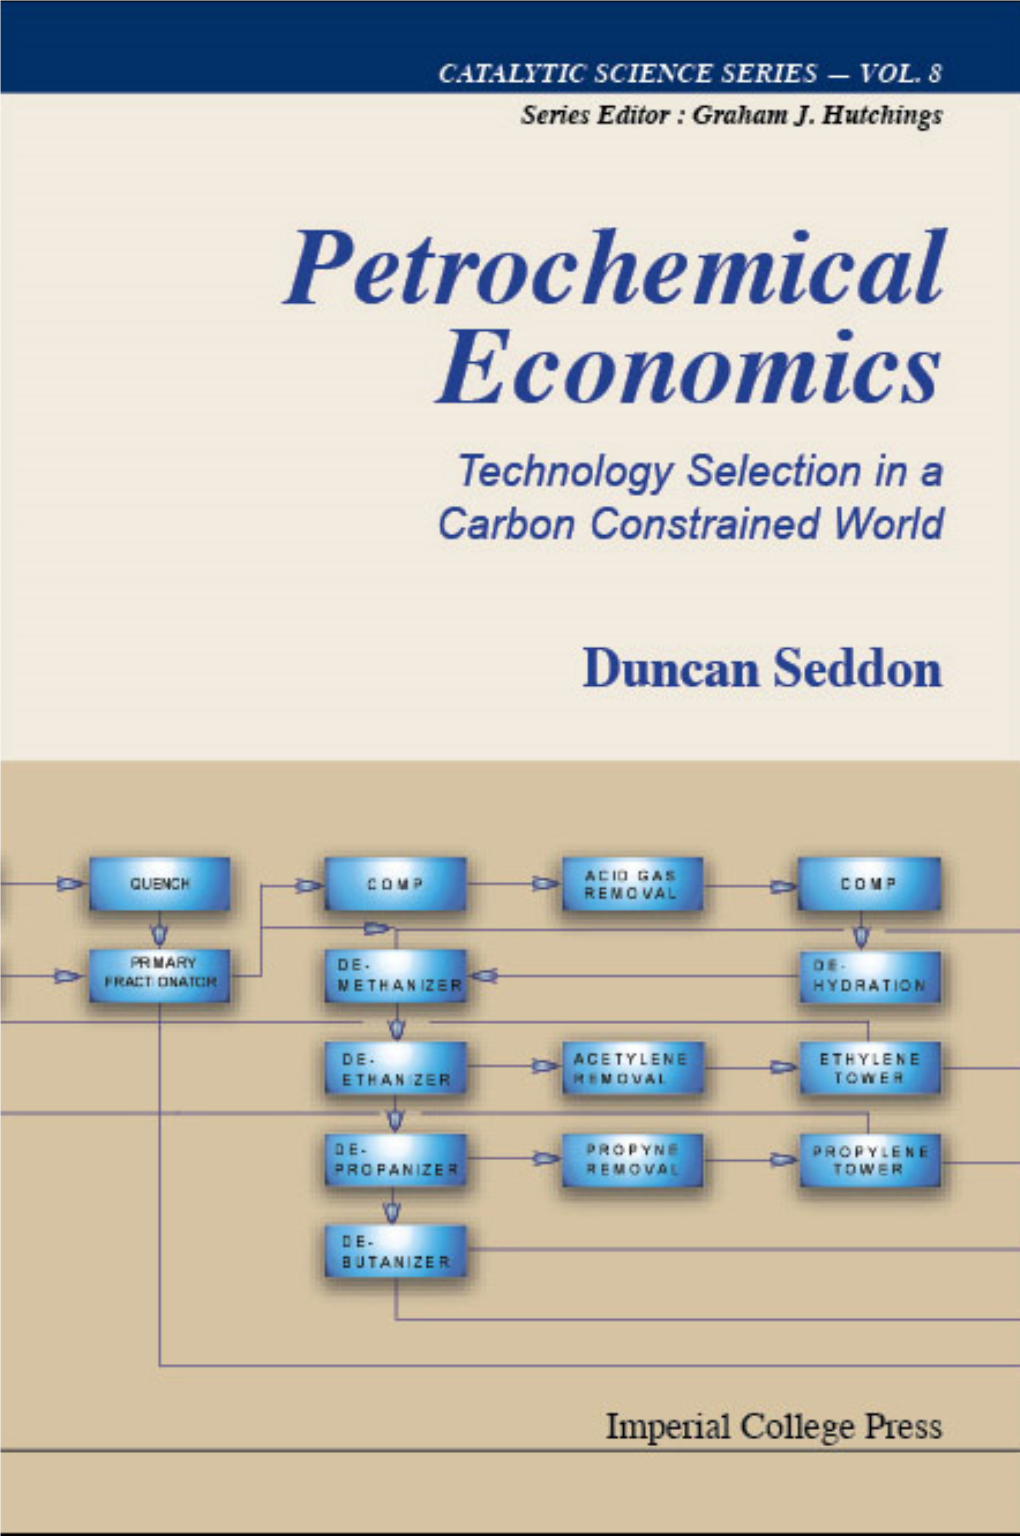 Petrochemical Economics Technology Selection in a Carbon Constrained World CATALYTIC SCIENCE SERIES